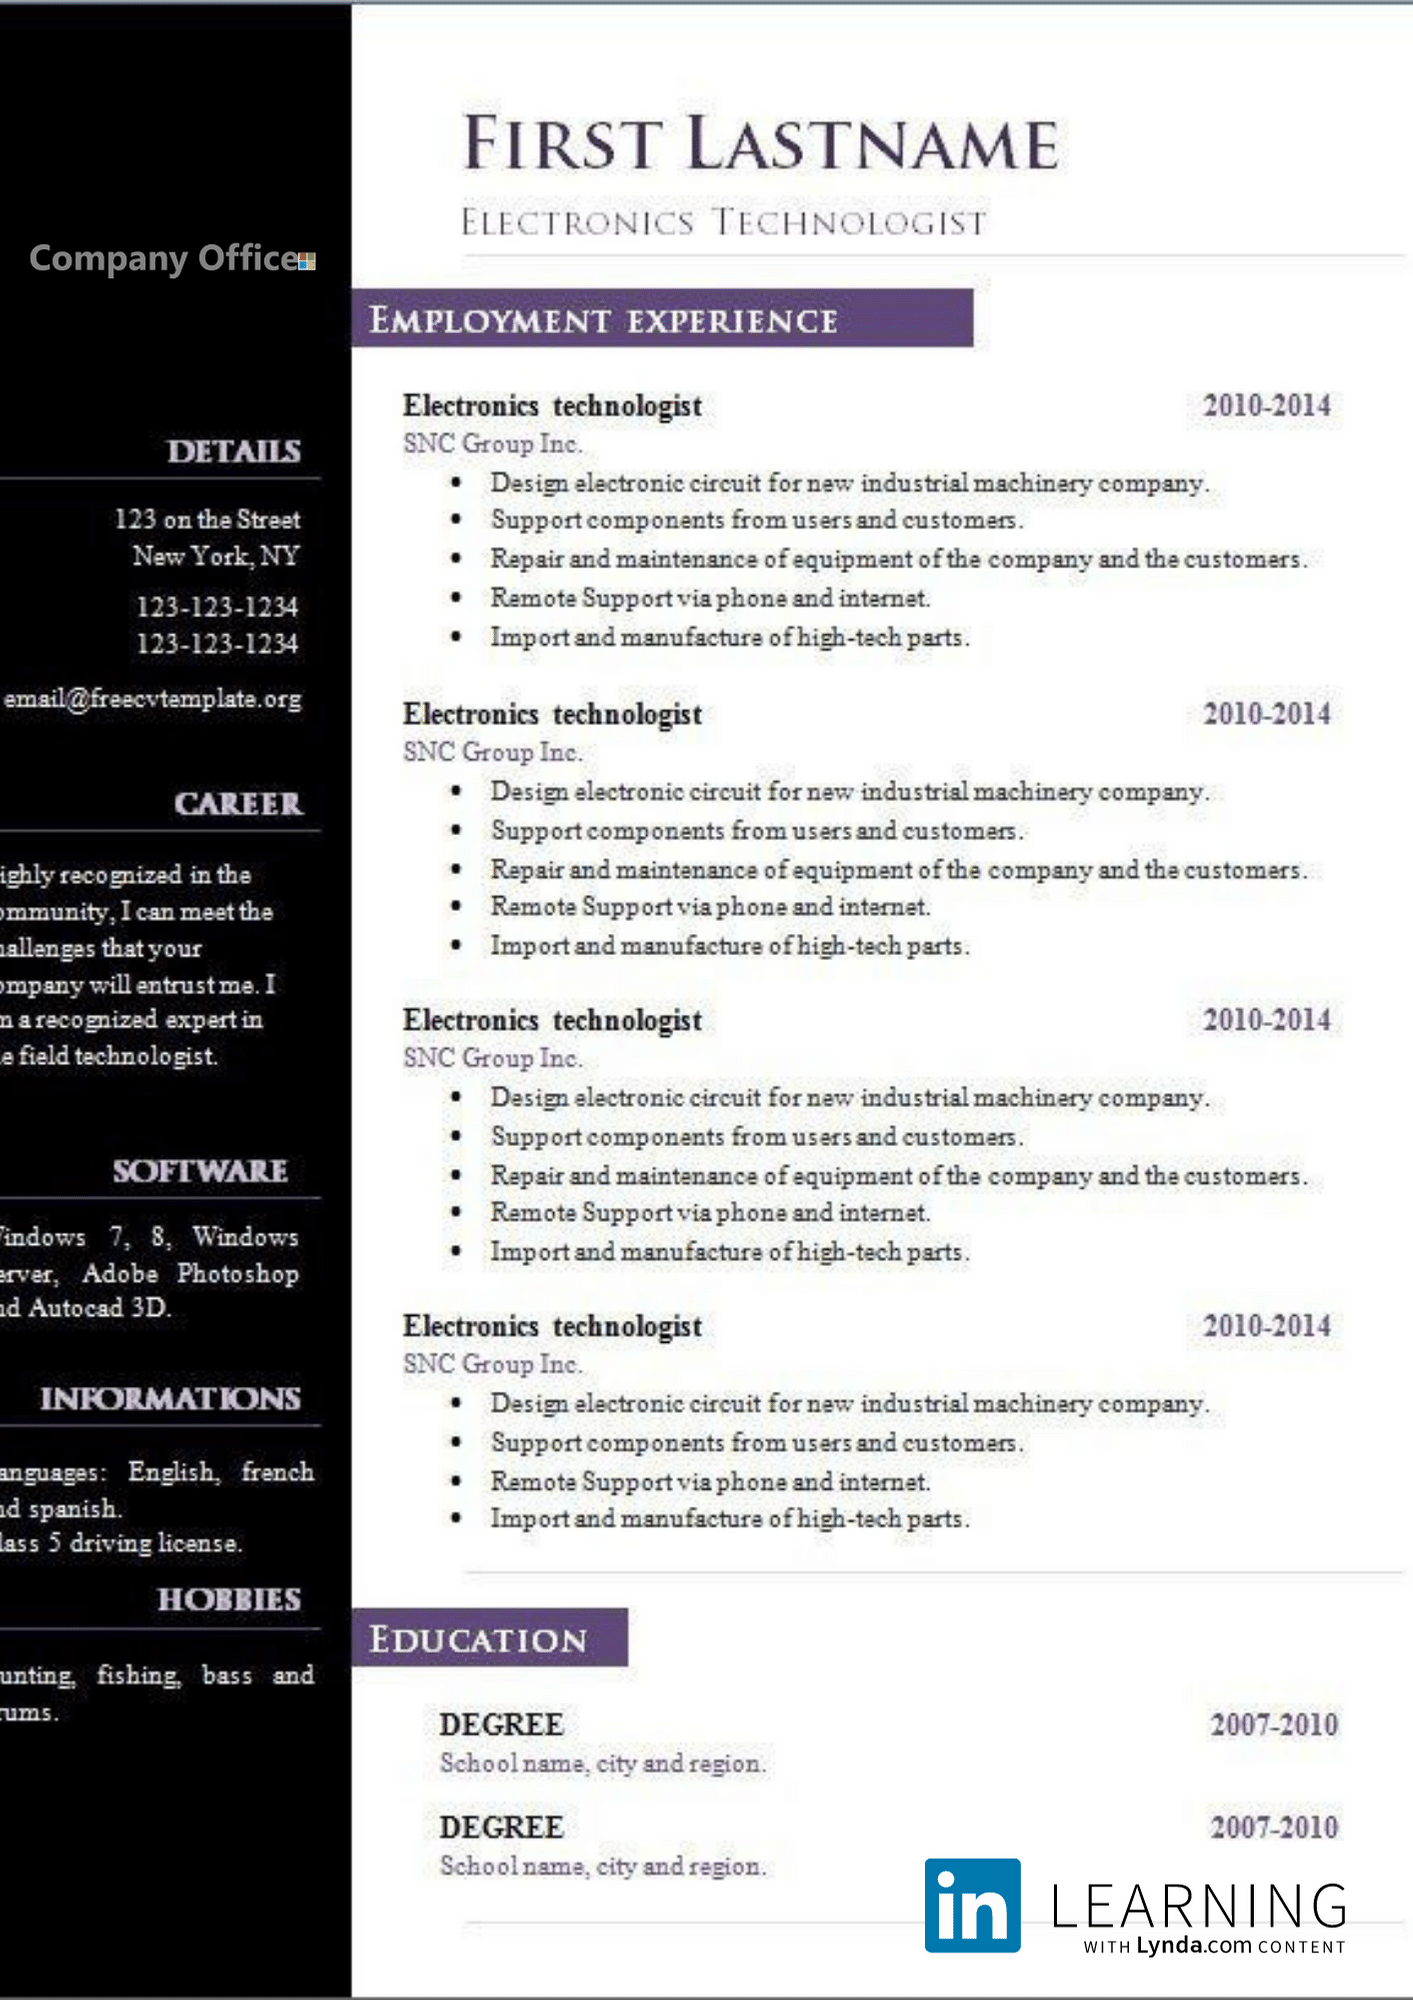 how to create a resume template in openoffice